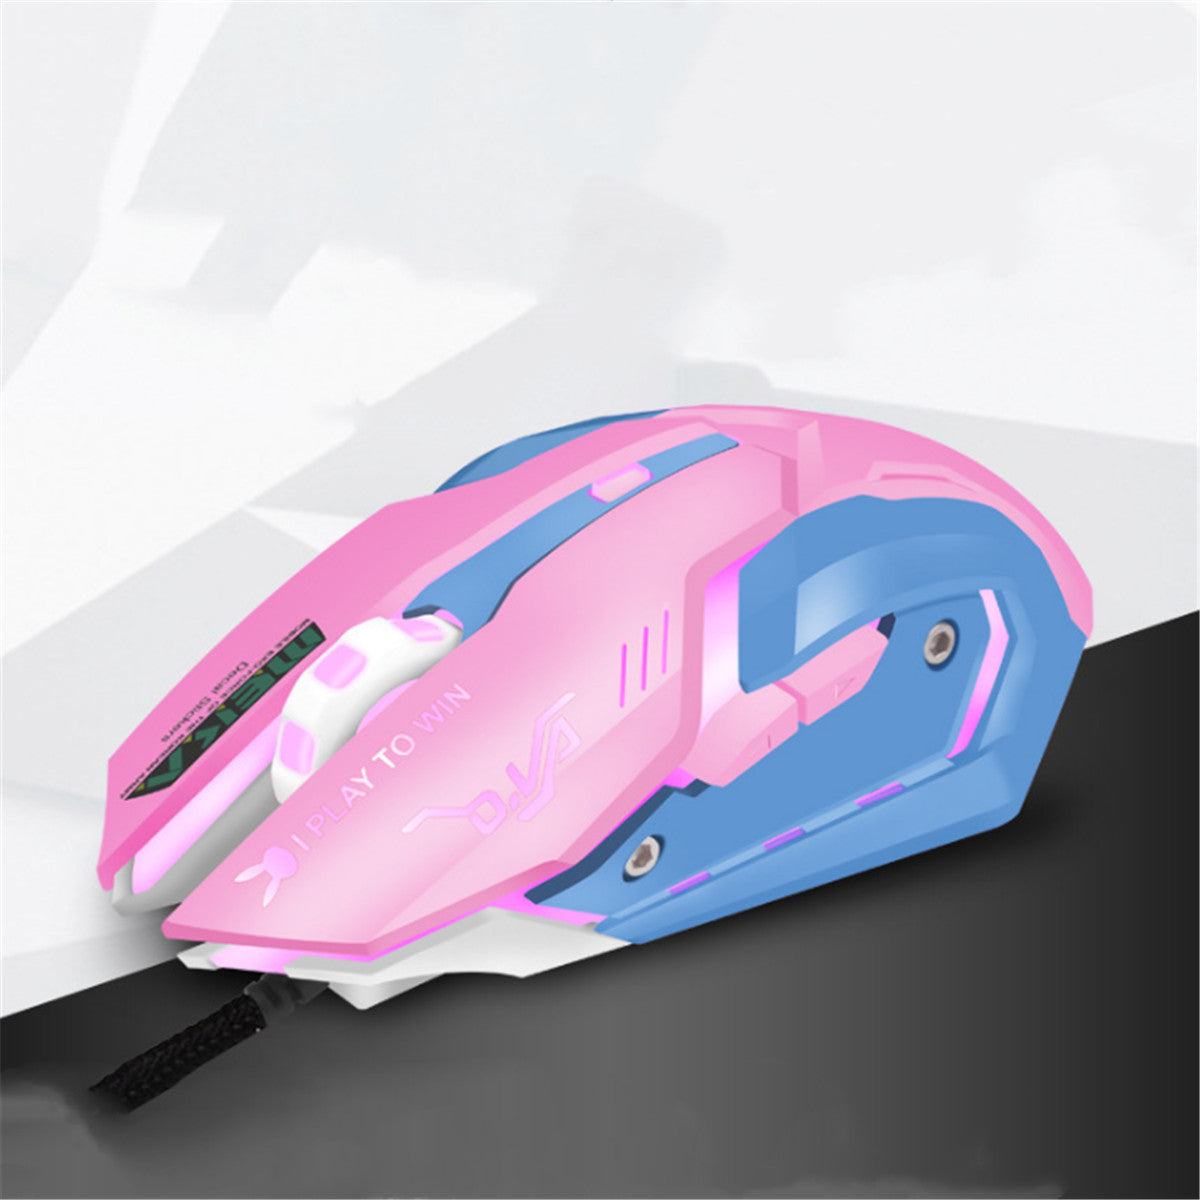 Game Overwatch D.va Pink Reaper Mercy Genji Electronic Sports USB Rechargeable Wired Mouse For Gaming And Office baby magazin 